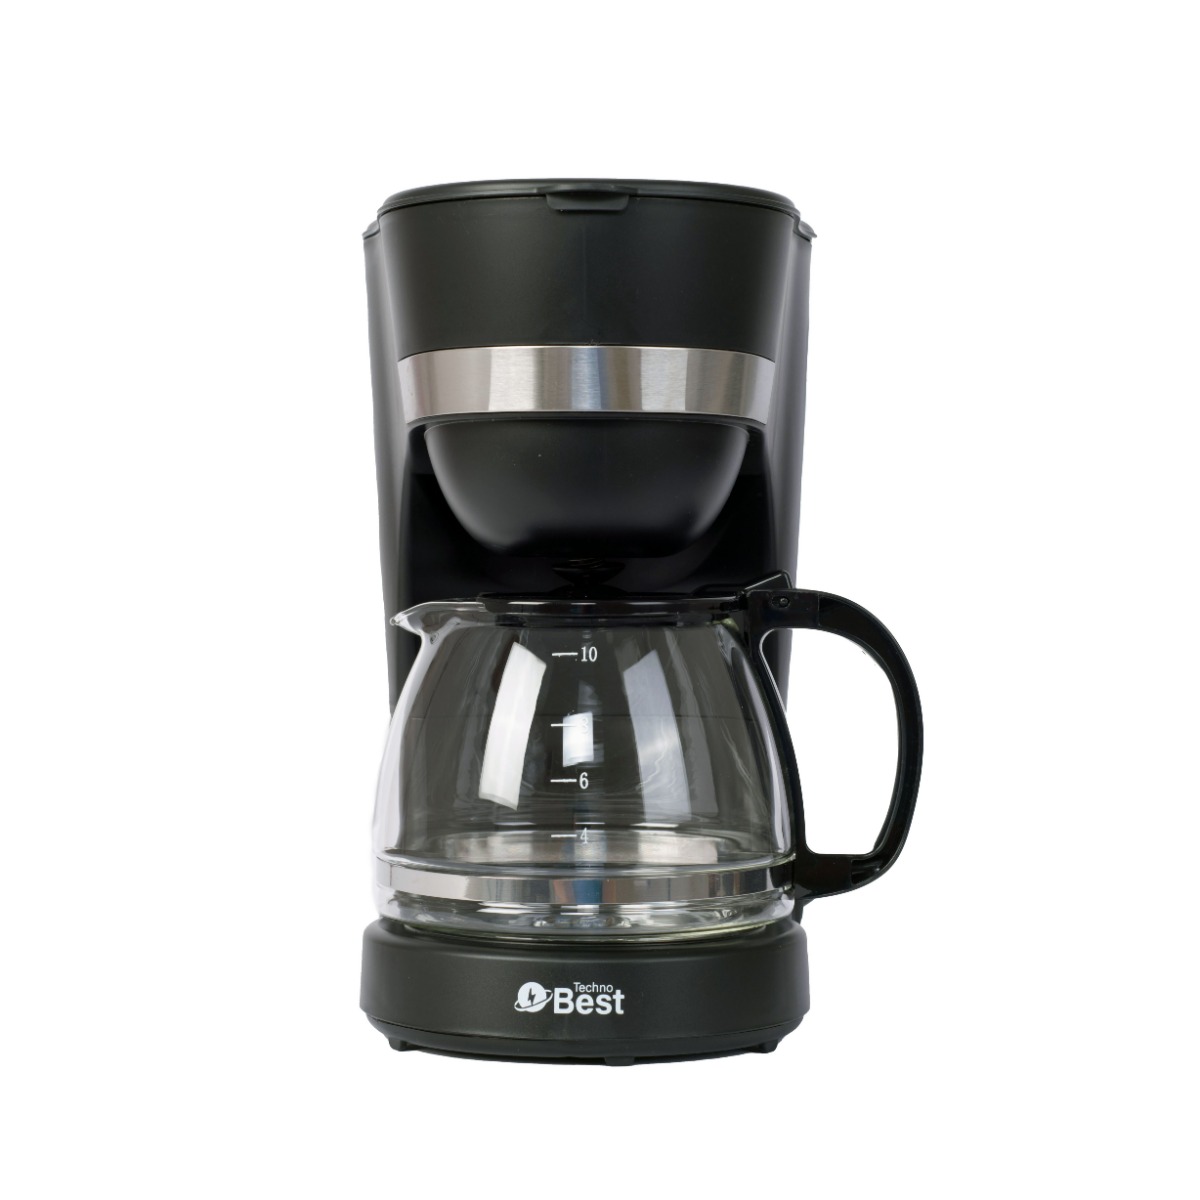 BEST COFFEE MAKER 1.25L, 750W,  With anti-dripping function,Transparent Glass Jar, Black - BCM-001